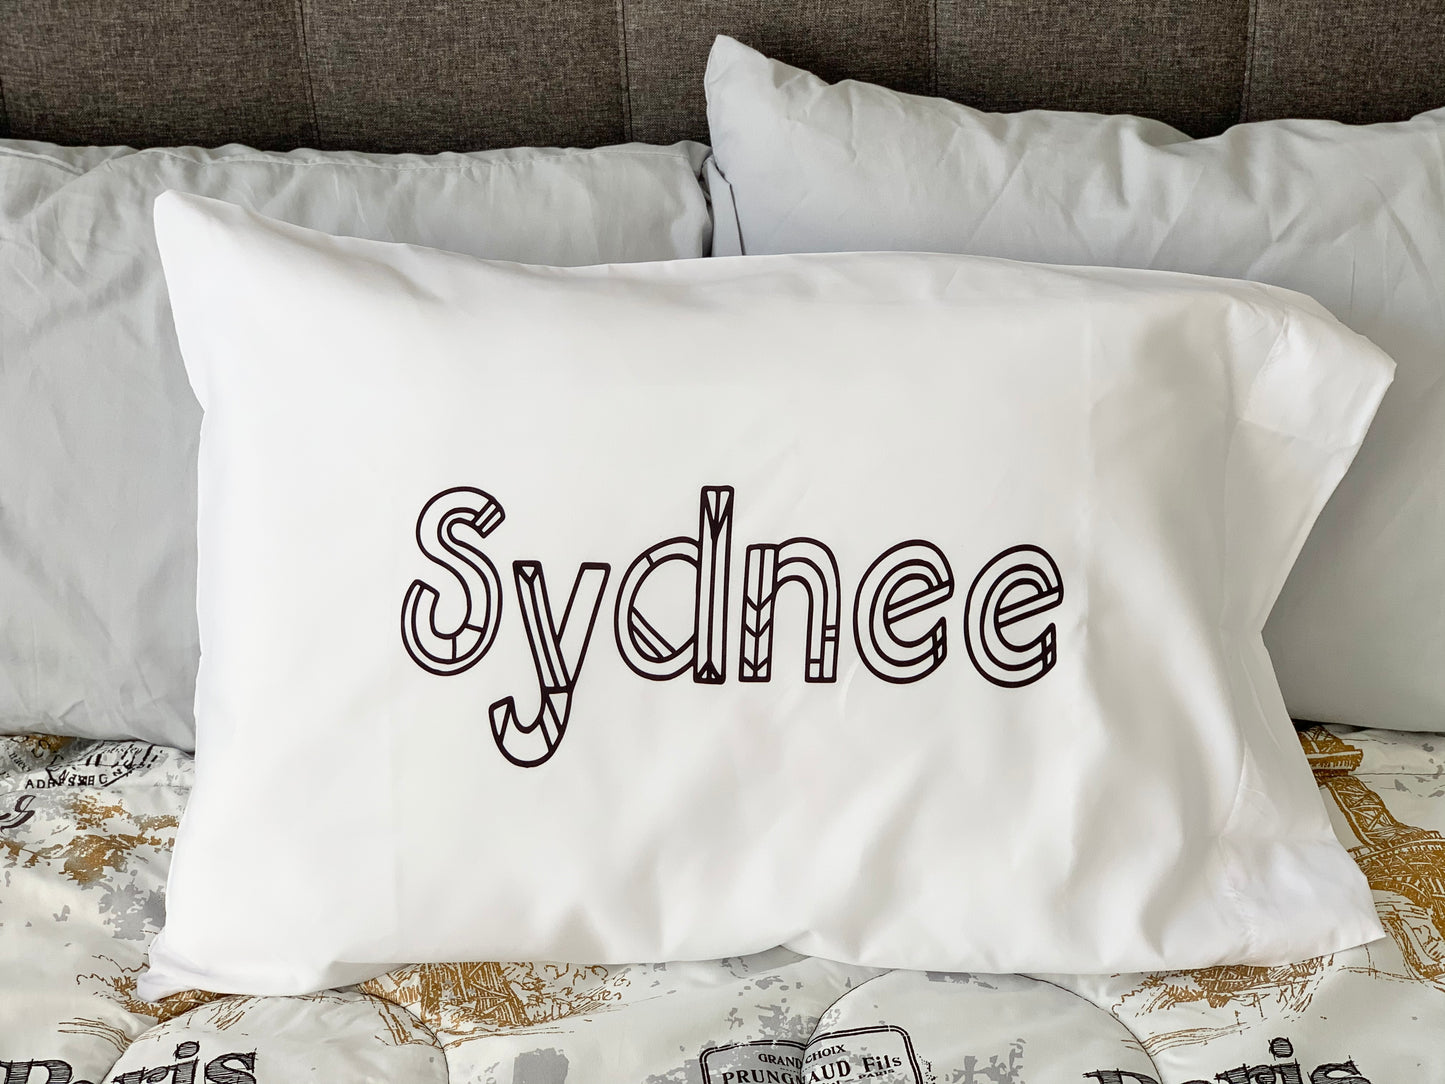 Color me personalized kids pillowcase